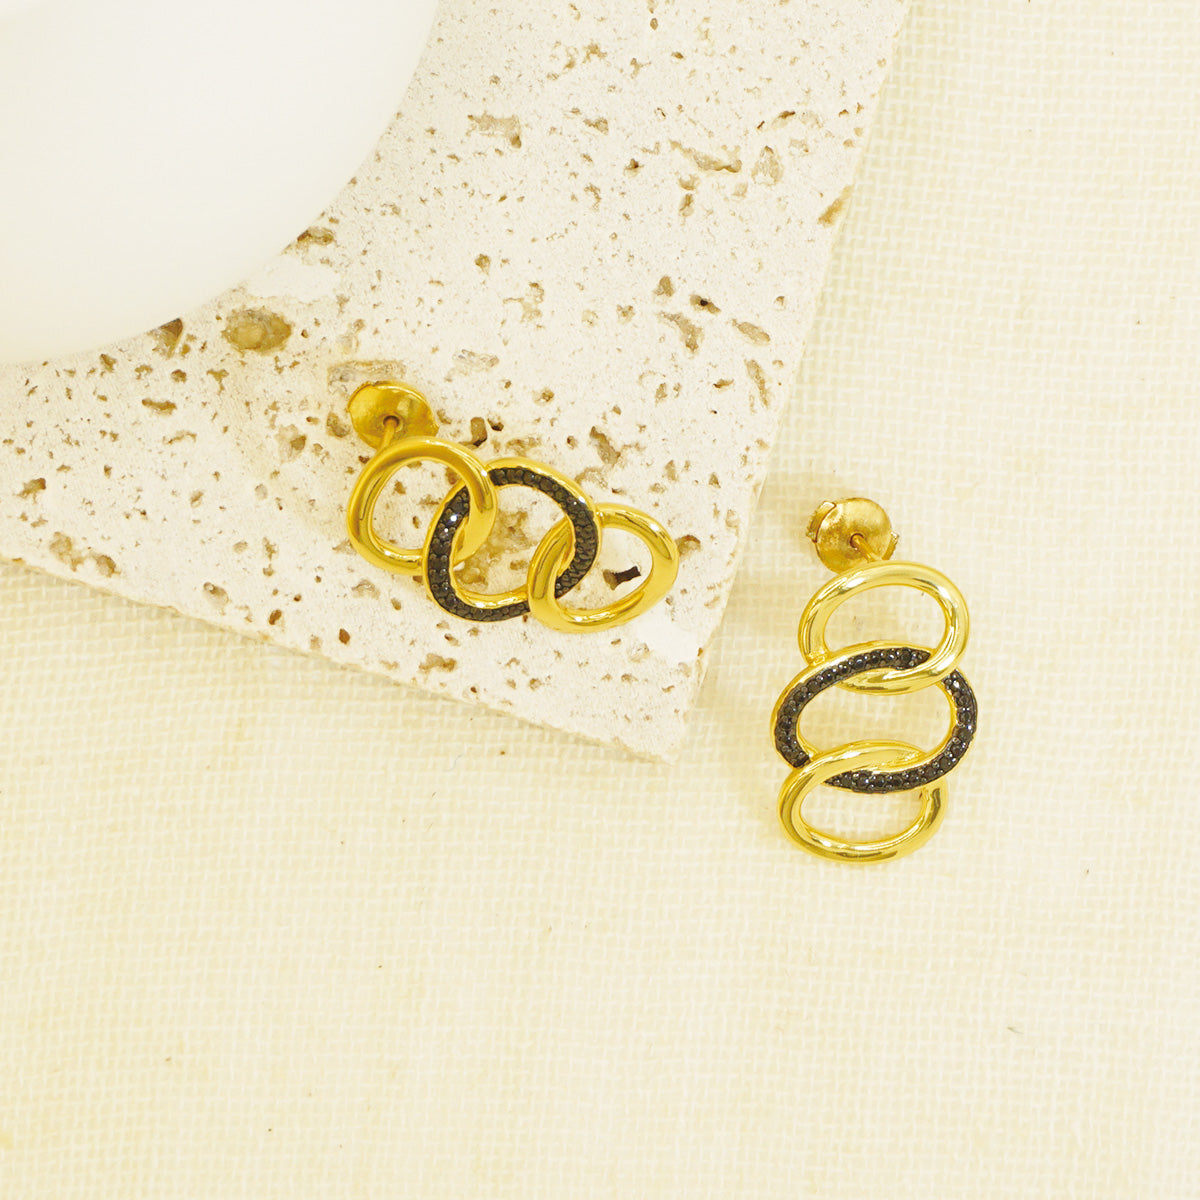 Gold Hammered Triple Hoop Earrings With Black Stones for Women